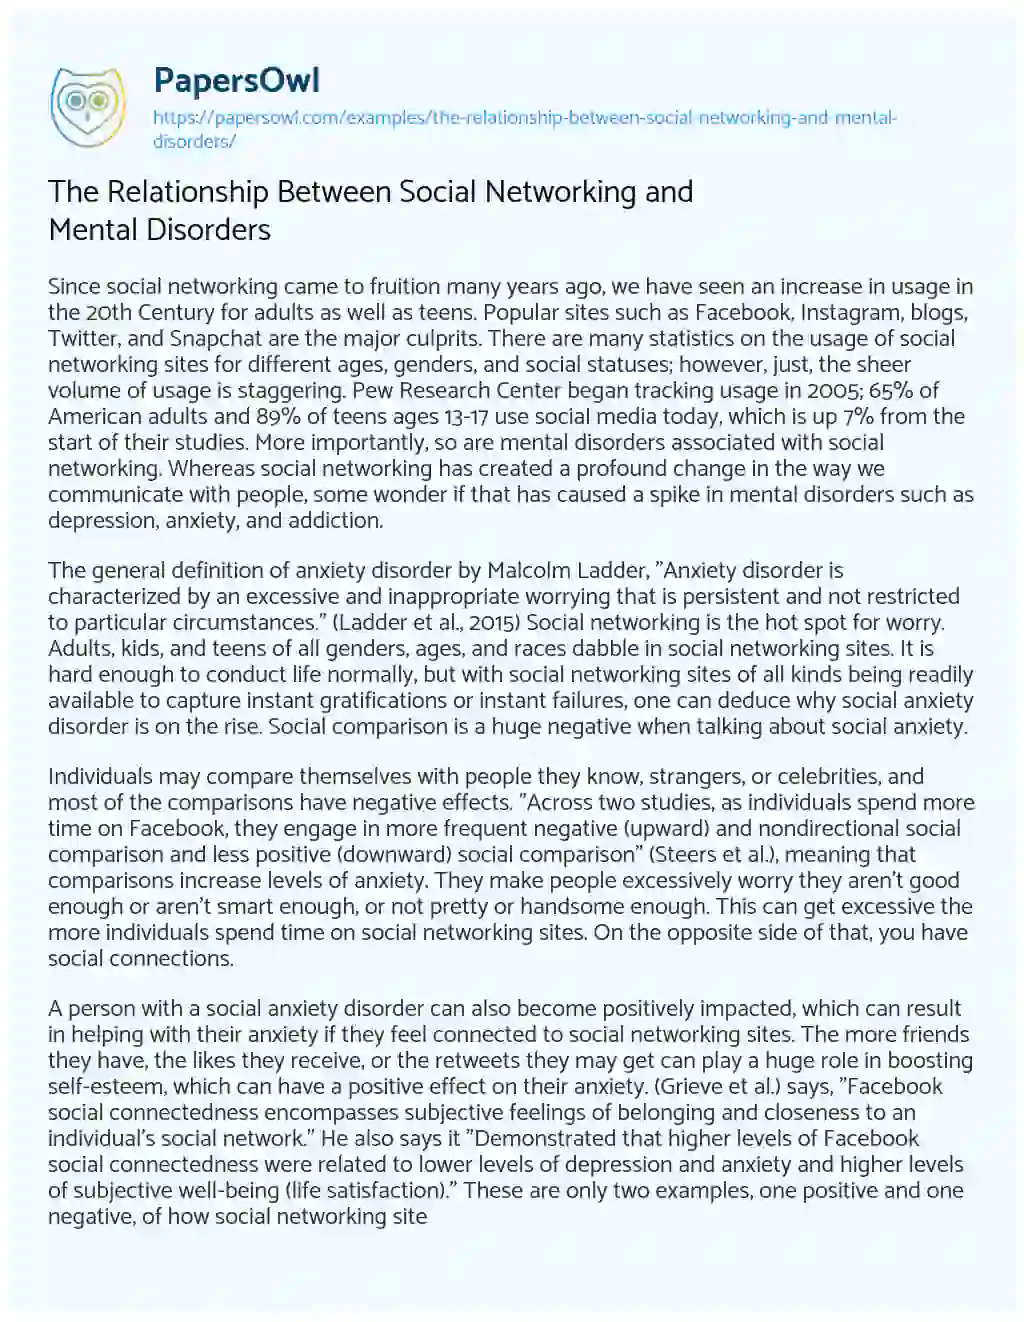 The Relationship between Social Networking and Mental Disorders essay